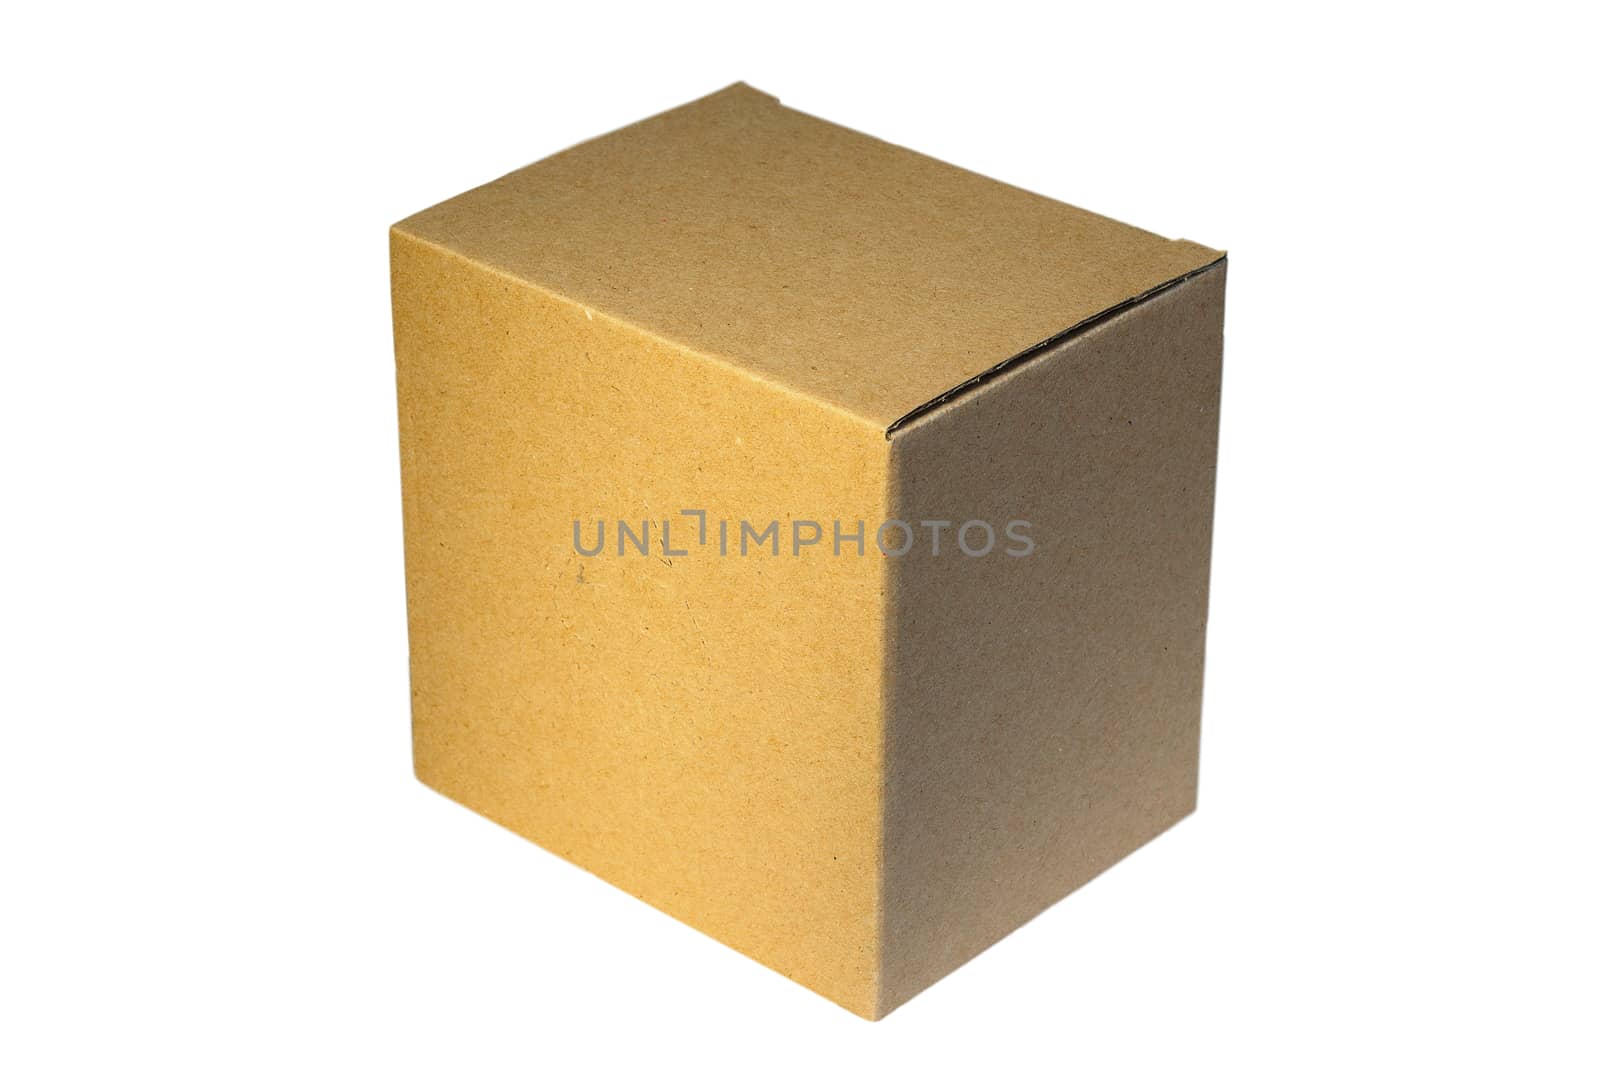 small closed carton box isolated over white background